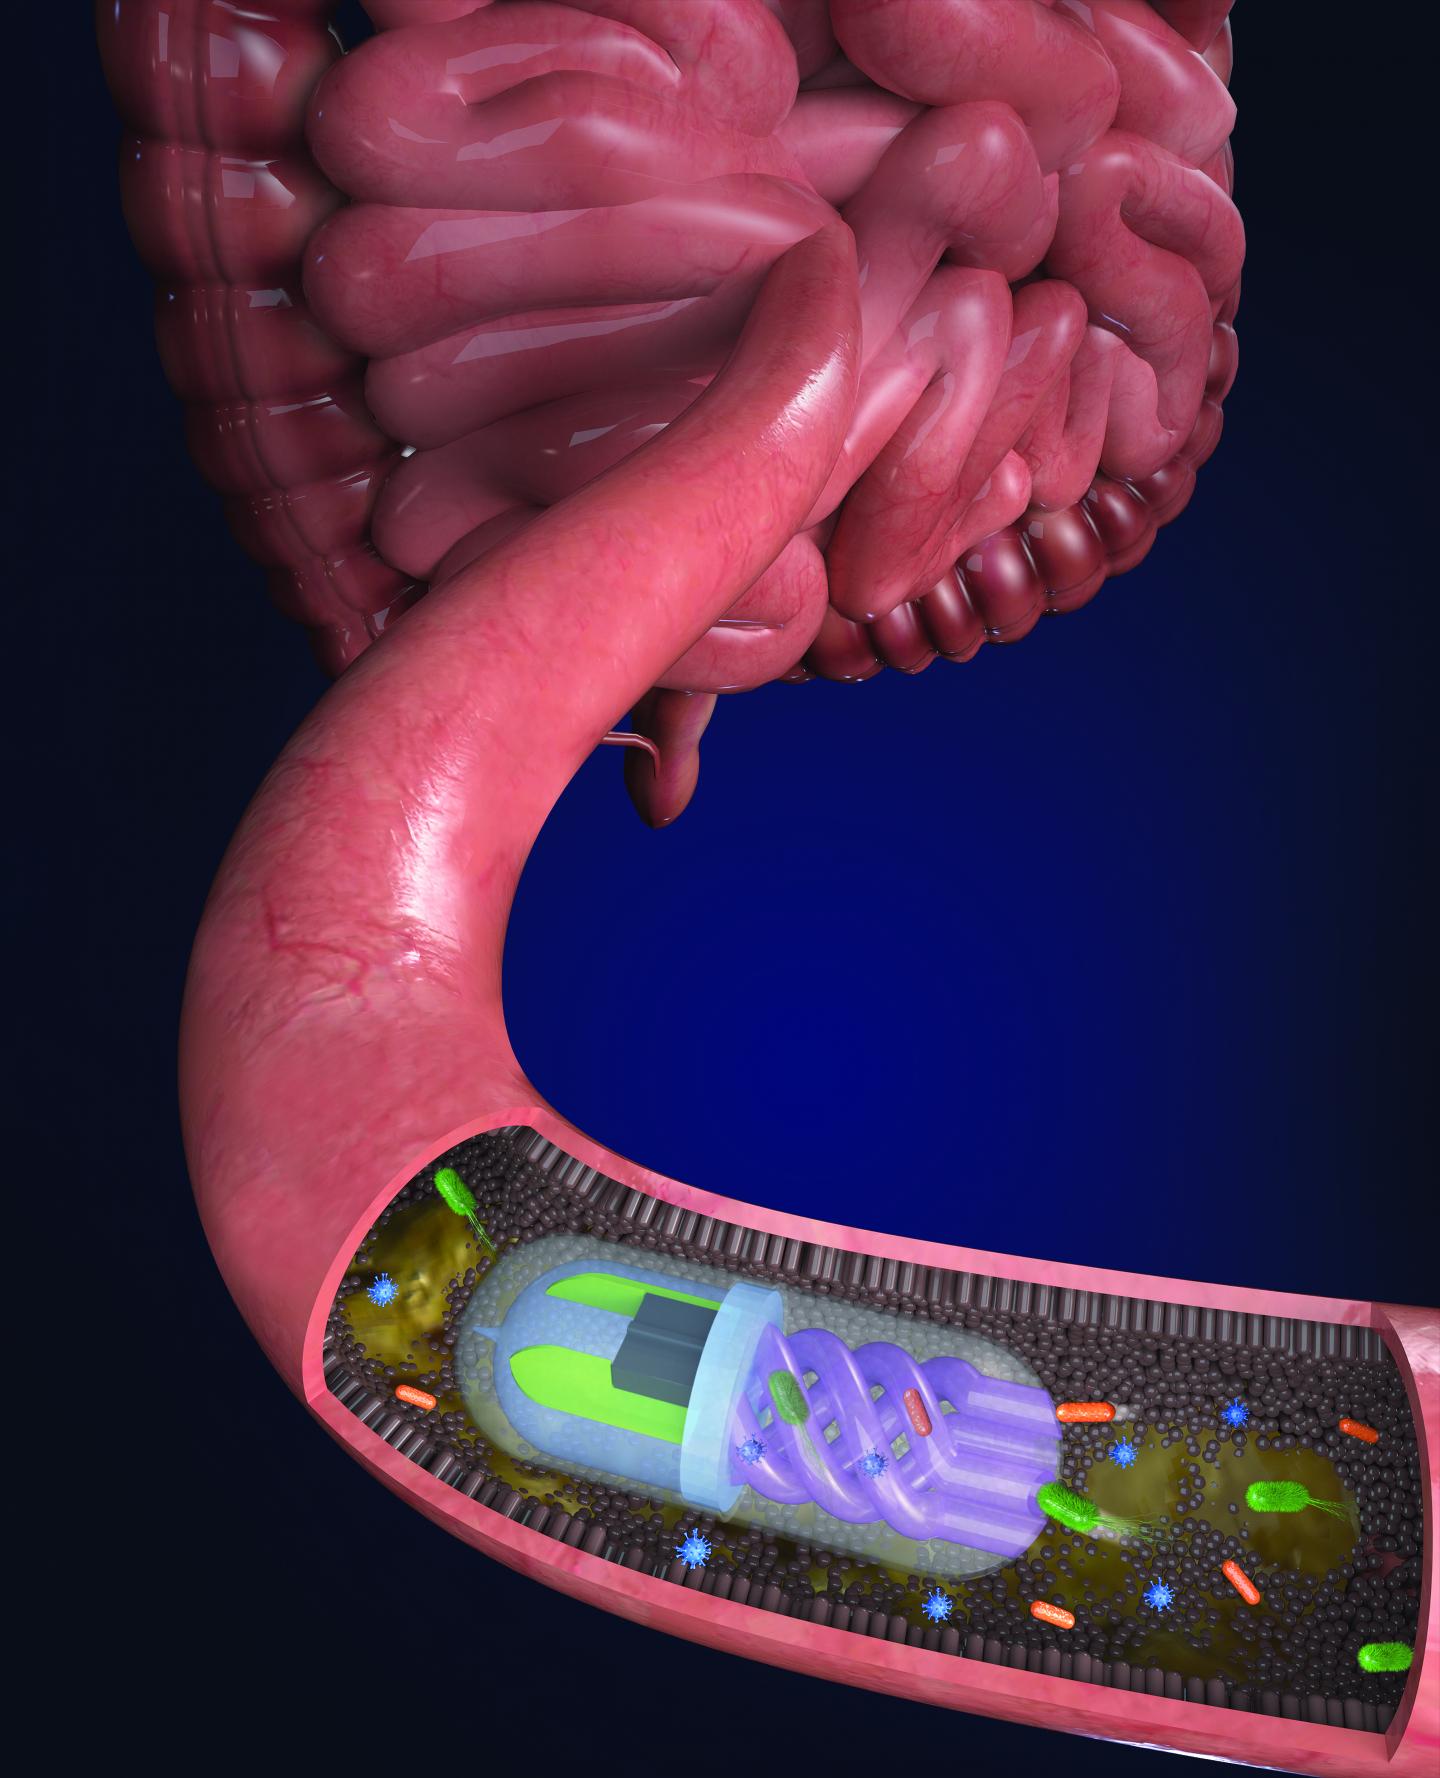 Microbiome Sampling Pill in the Small Intestine